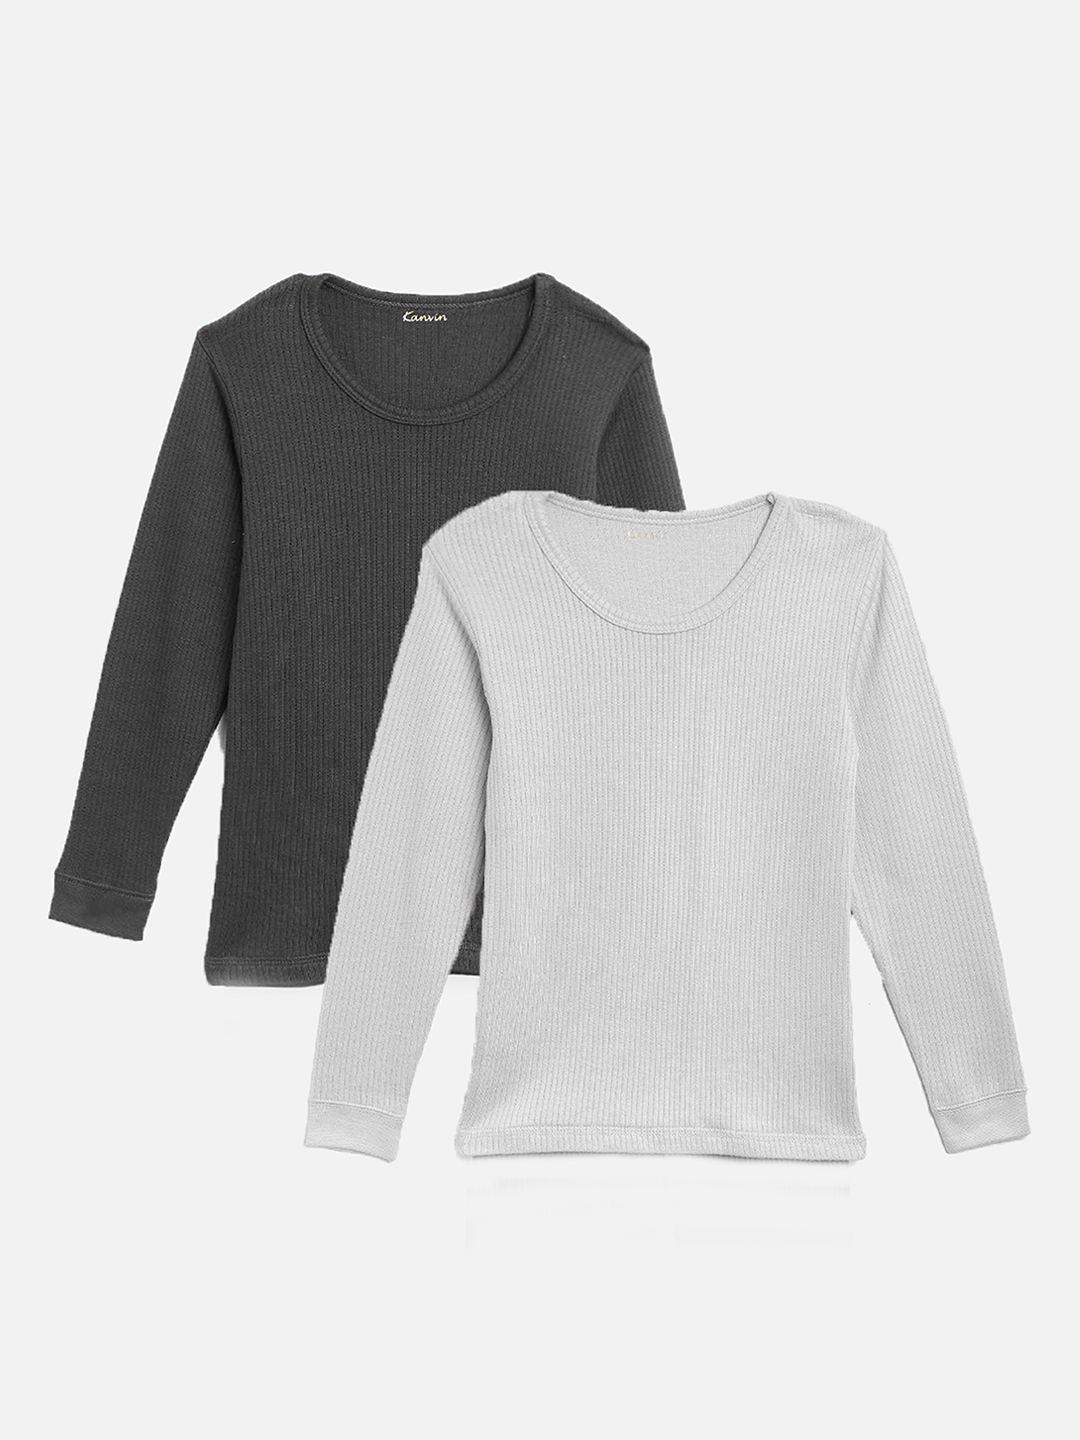 kanvin boys pack of 2 charcoal & grey ribbed cotton thermal tops